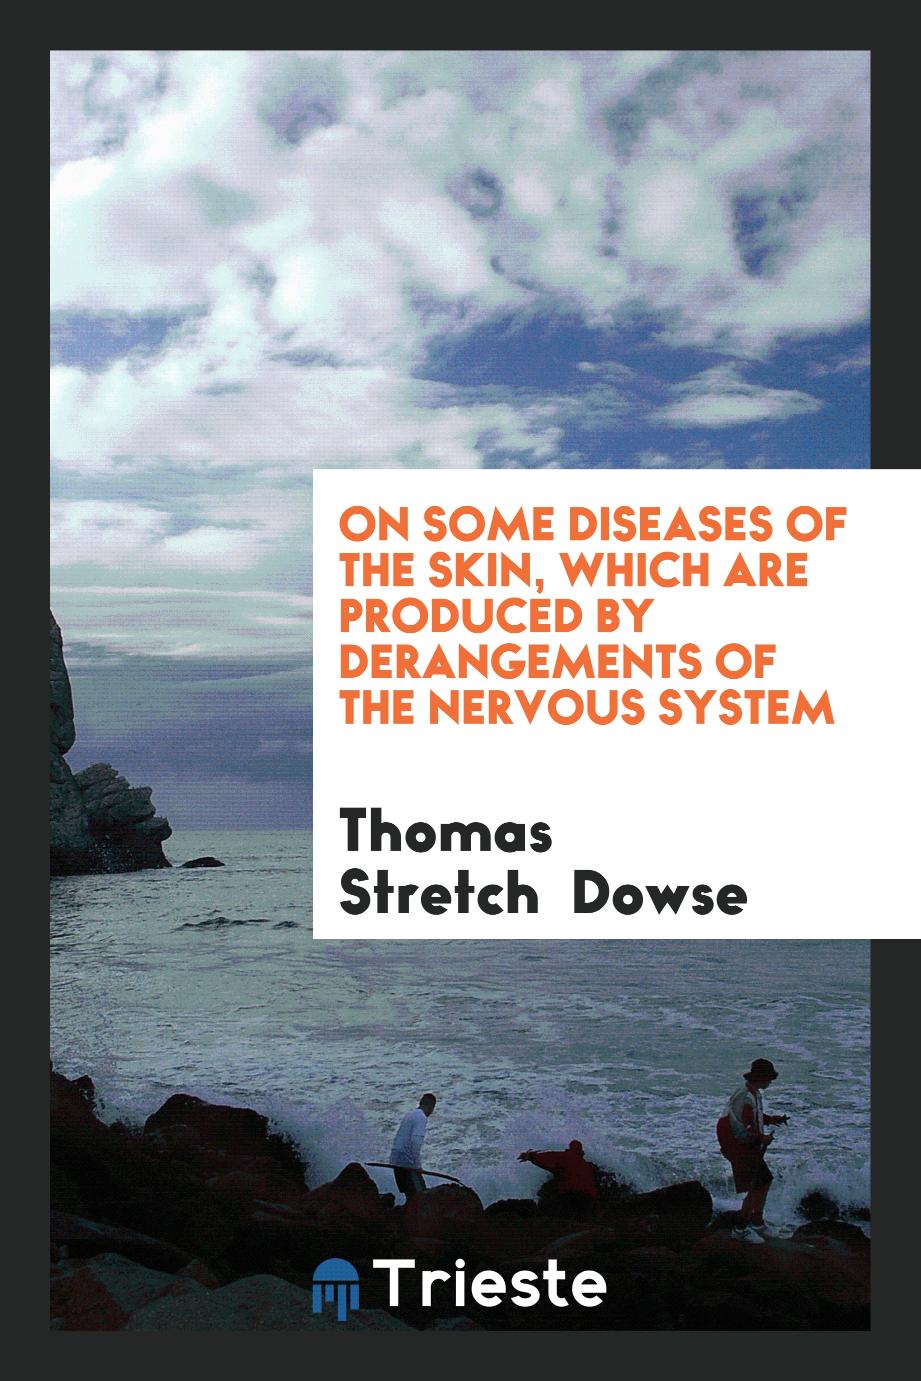 On some diseases of the skin, which are produced by derangements of the nervous system